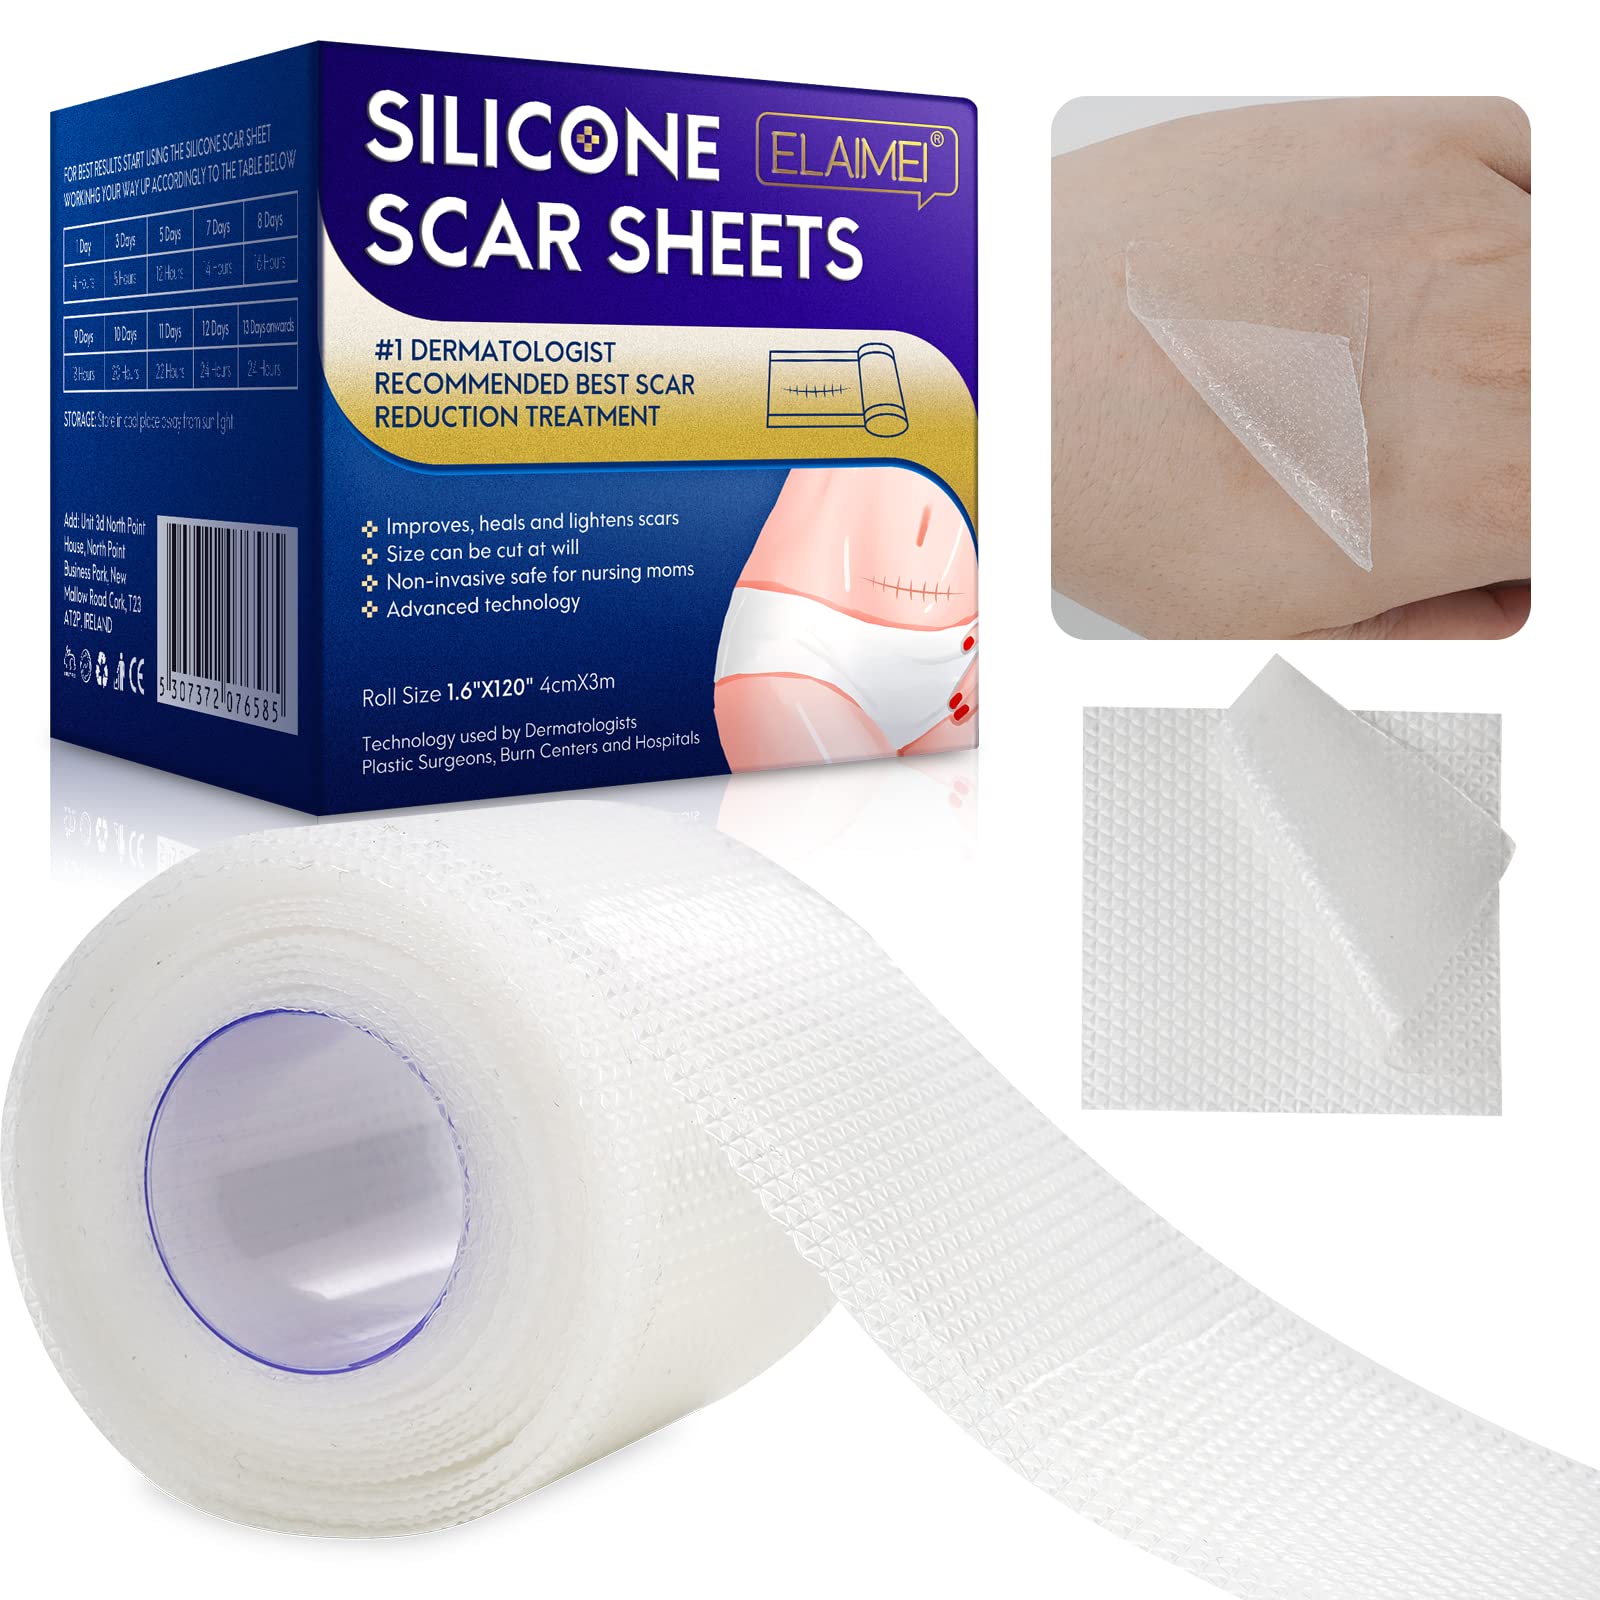 Silicone Scar Sheets (1.6”x 120”, 3M), Clear Scar Tape, Silicone Scar  Strips, Effective Scars Away, Invisible Silicone Scar Sheets For Surgical  Scars